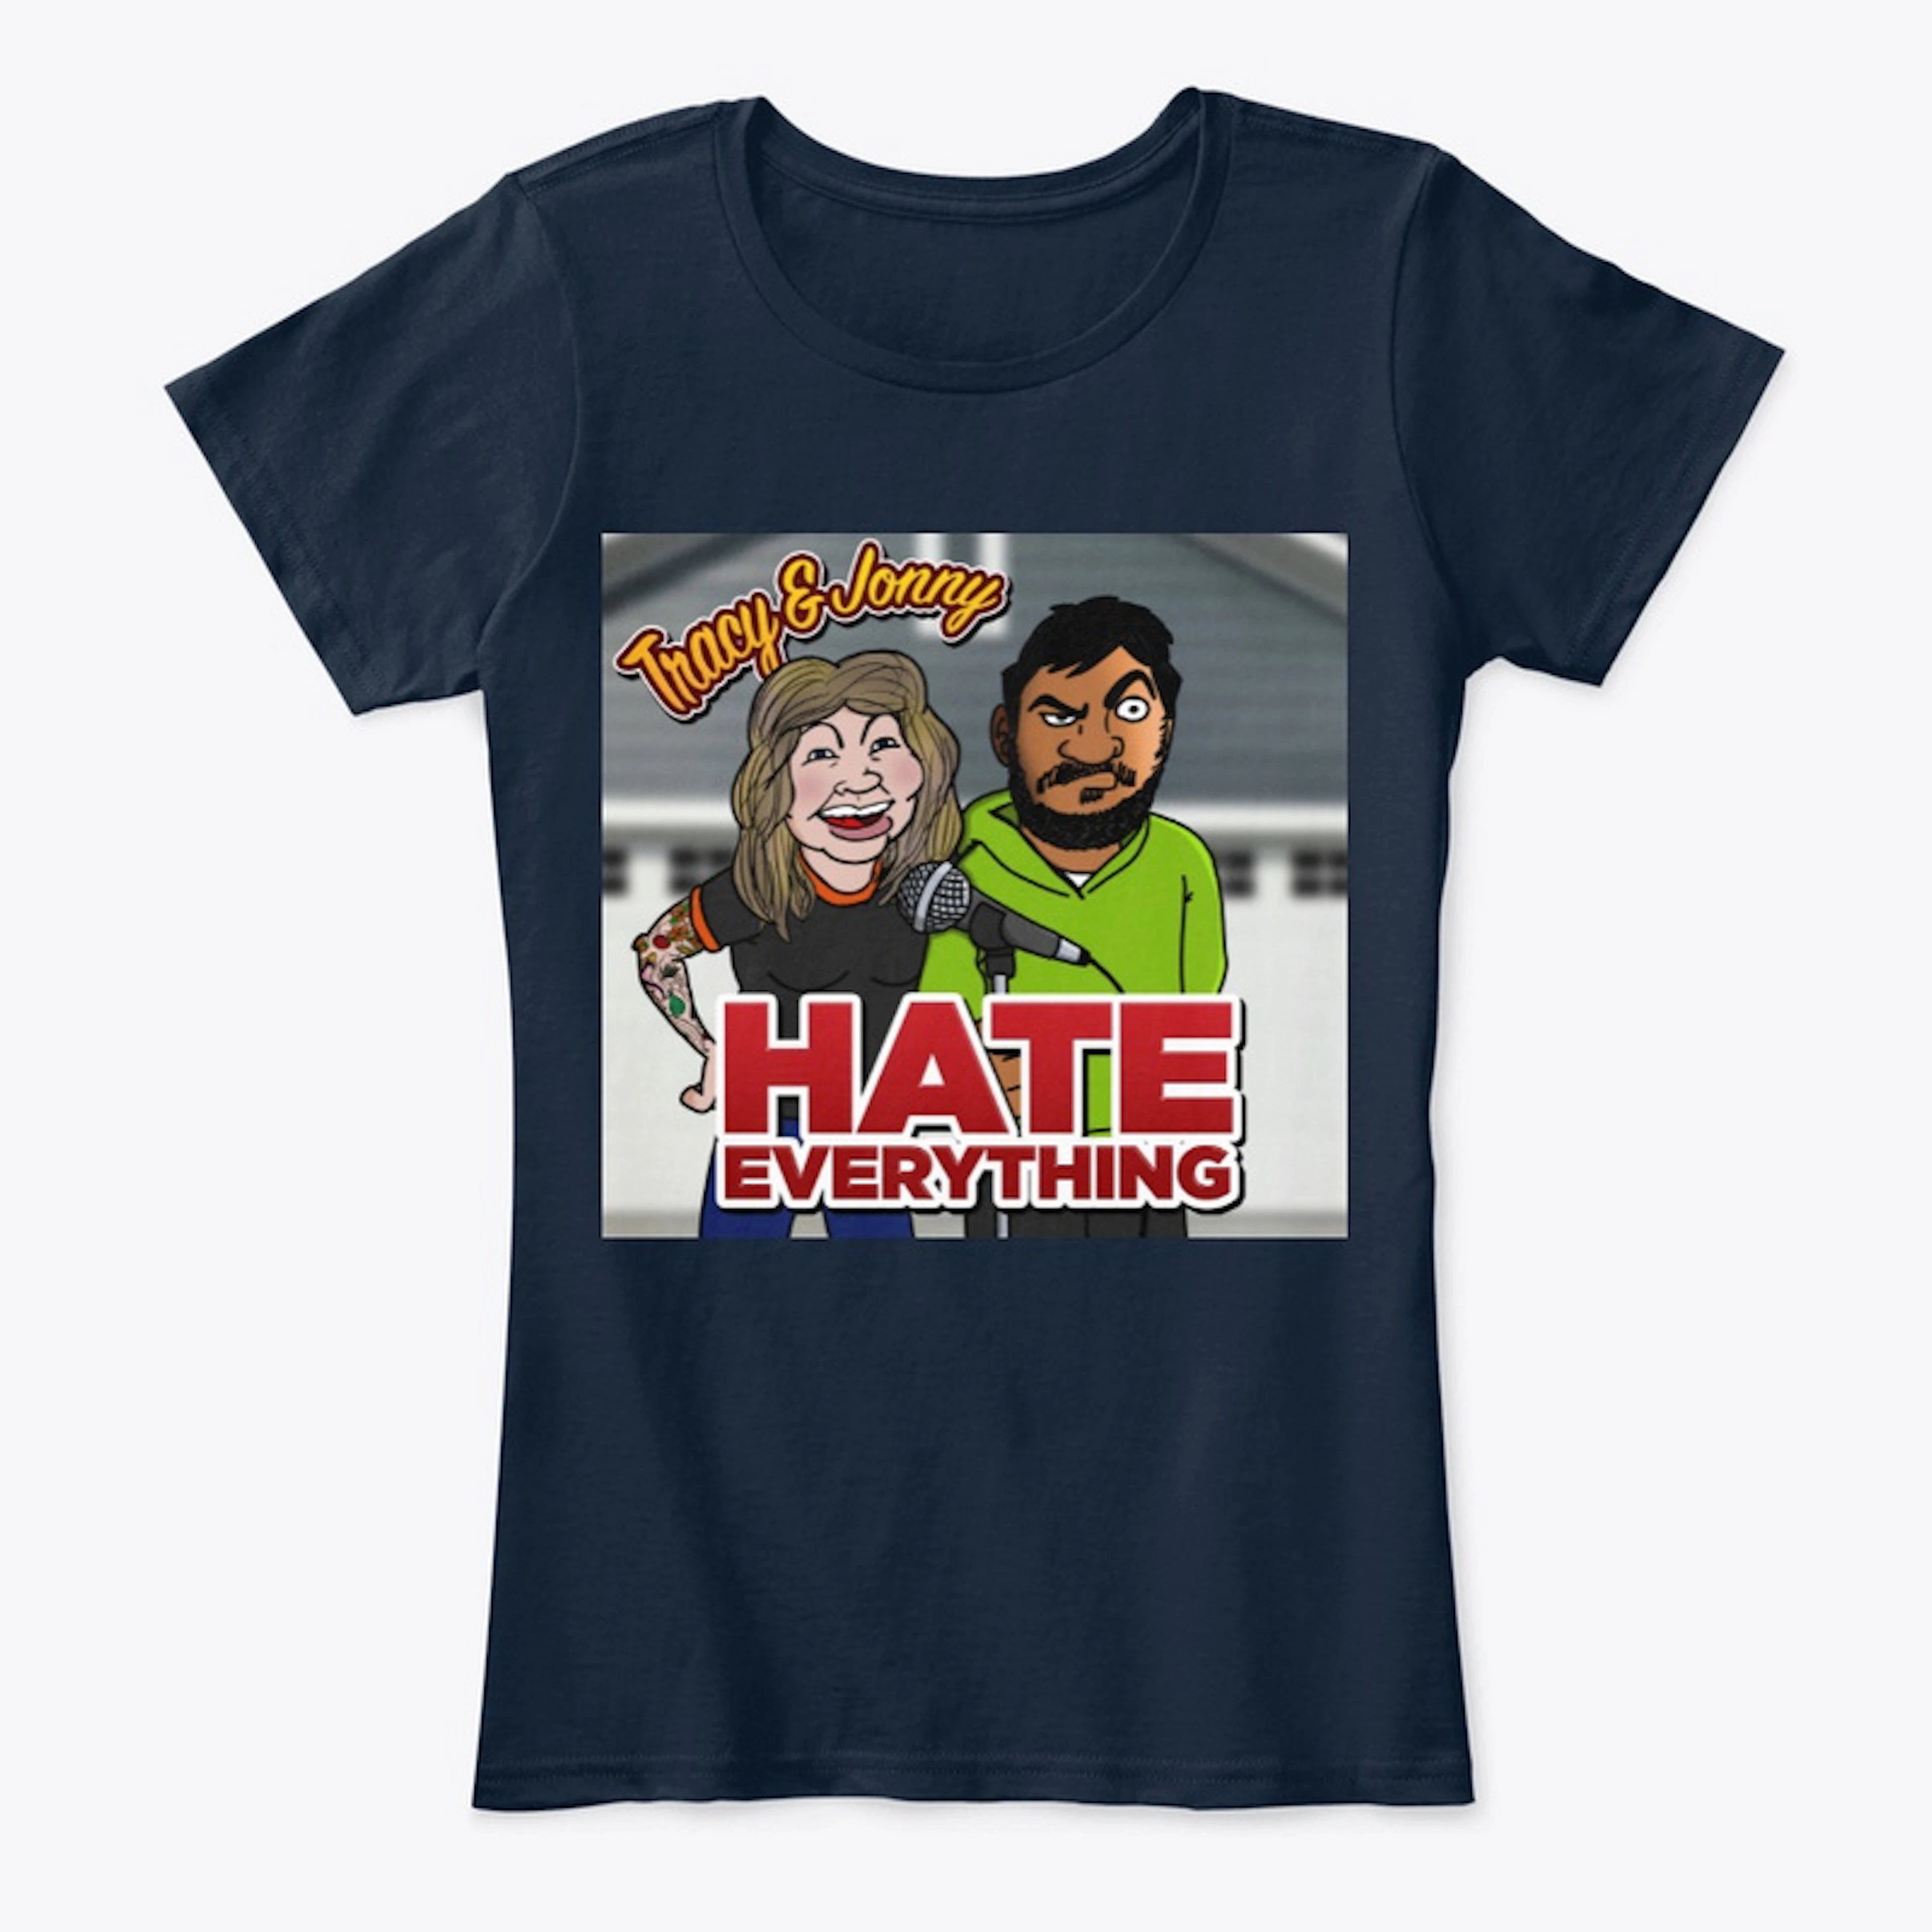 Hate Everything - Tee